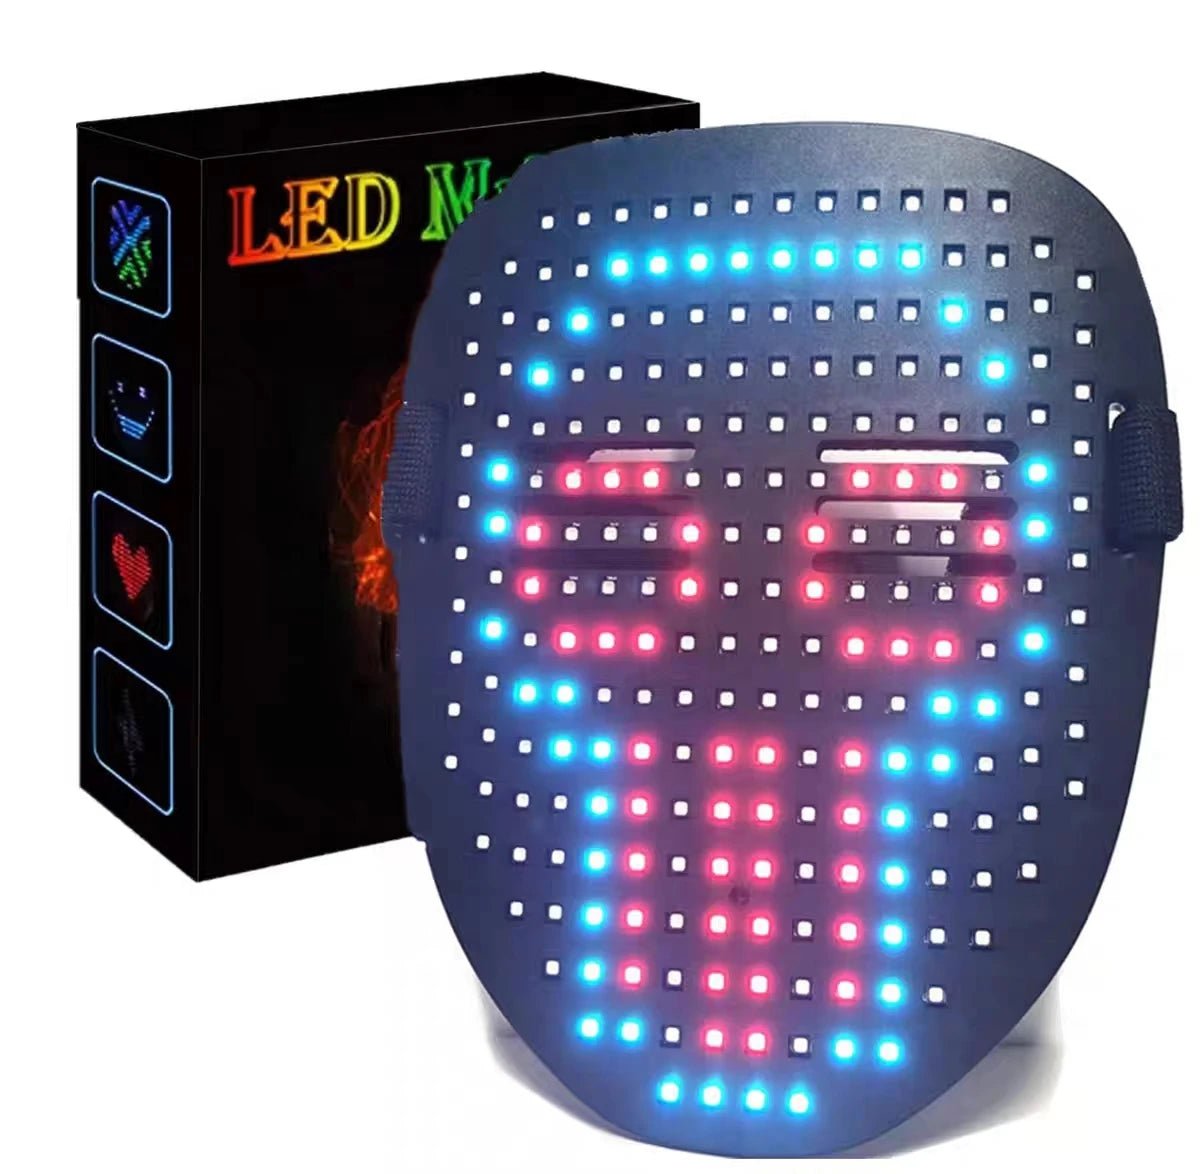 LED Gesture Control Mask - The Rave Cave